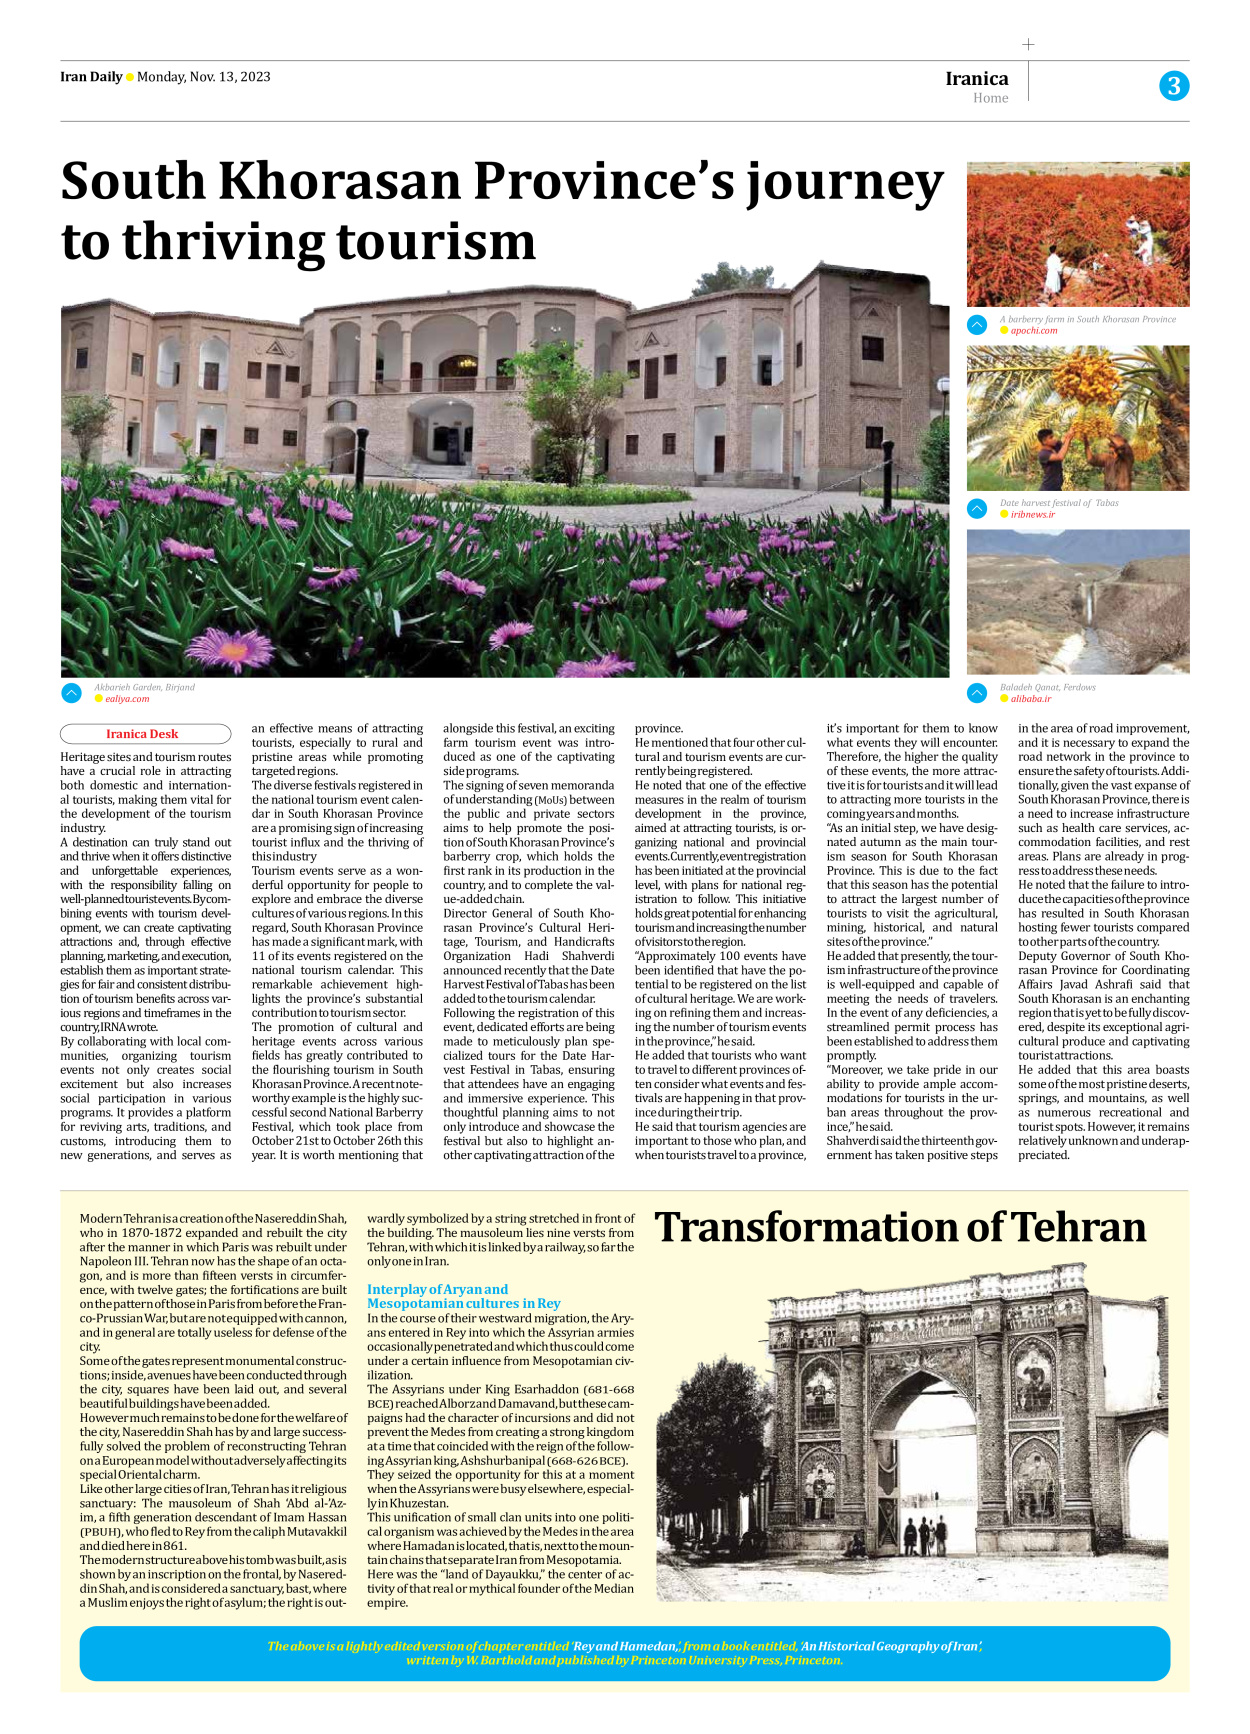 Iran Daily - Number Seven Thousand Four Hundred and Thirty Three - 13 November 2023 - Page 3